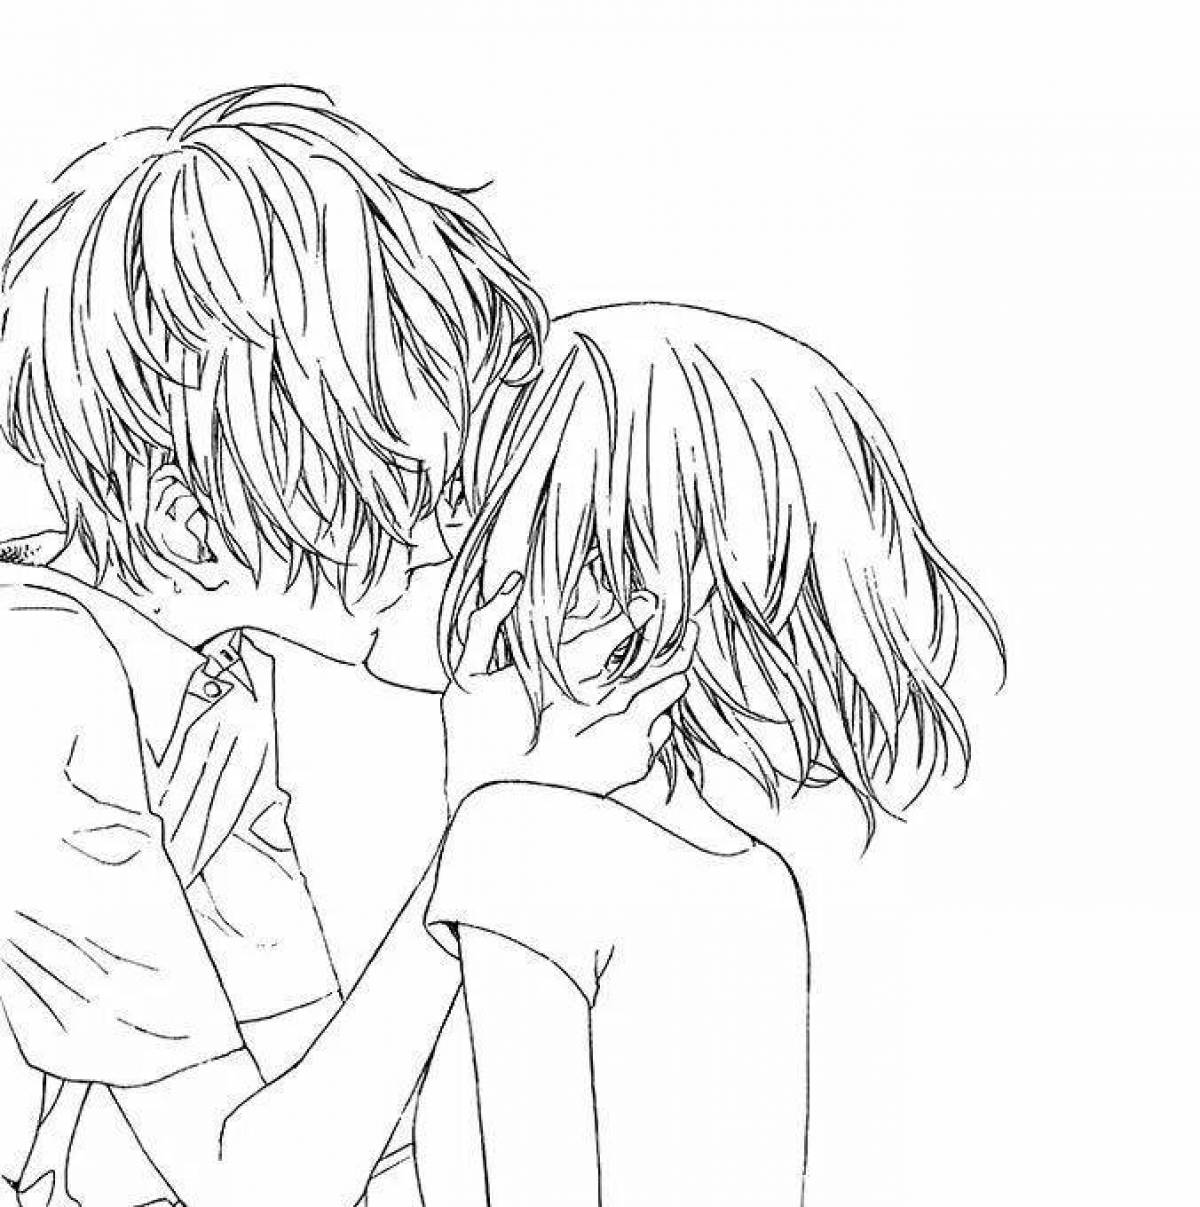 Delightful anime couple coloring page